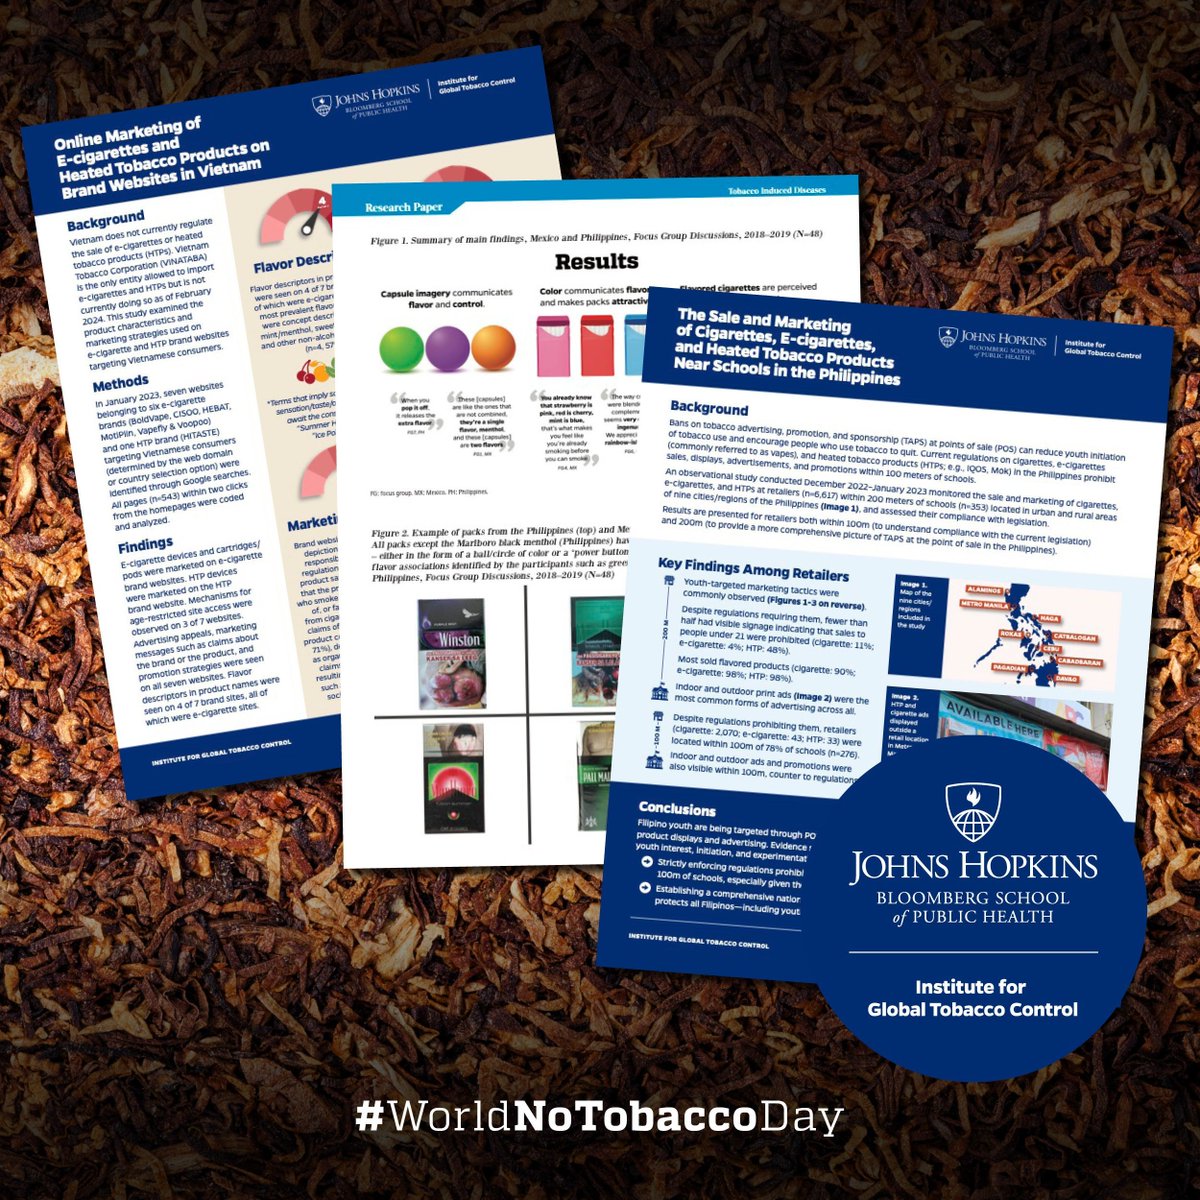 Today is #WorldNoTobaccoDay. See exactly how far the tobacco industry is willing to go to beckon young consumers towards a lifetime of nicotine addiction and tobacco use resource kit. Get the facts on youth-targeted tobacco marketing and spread the word: buff.ly/44LqRWM